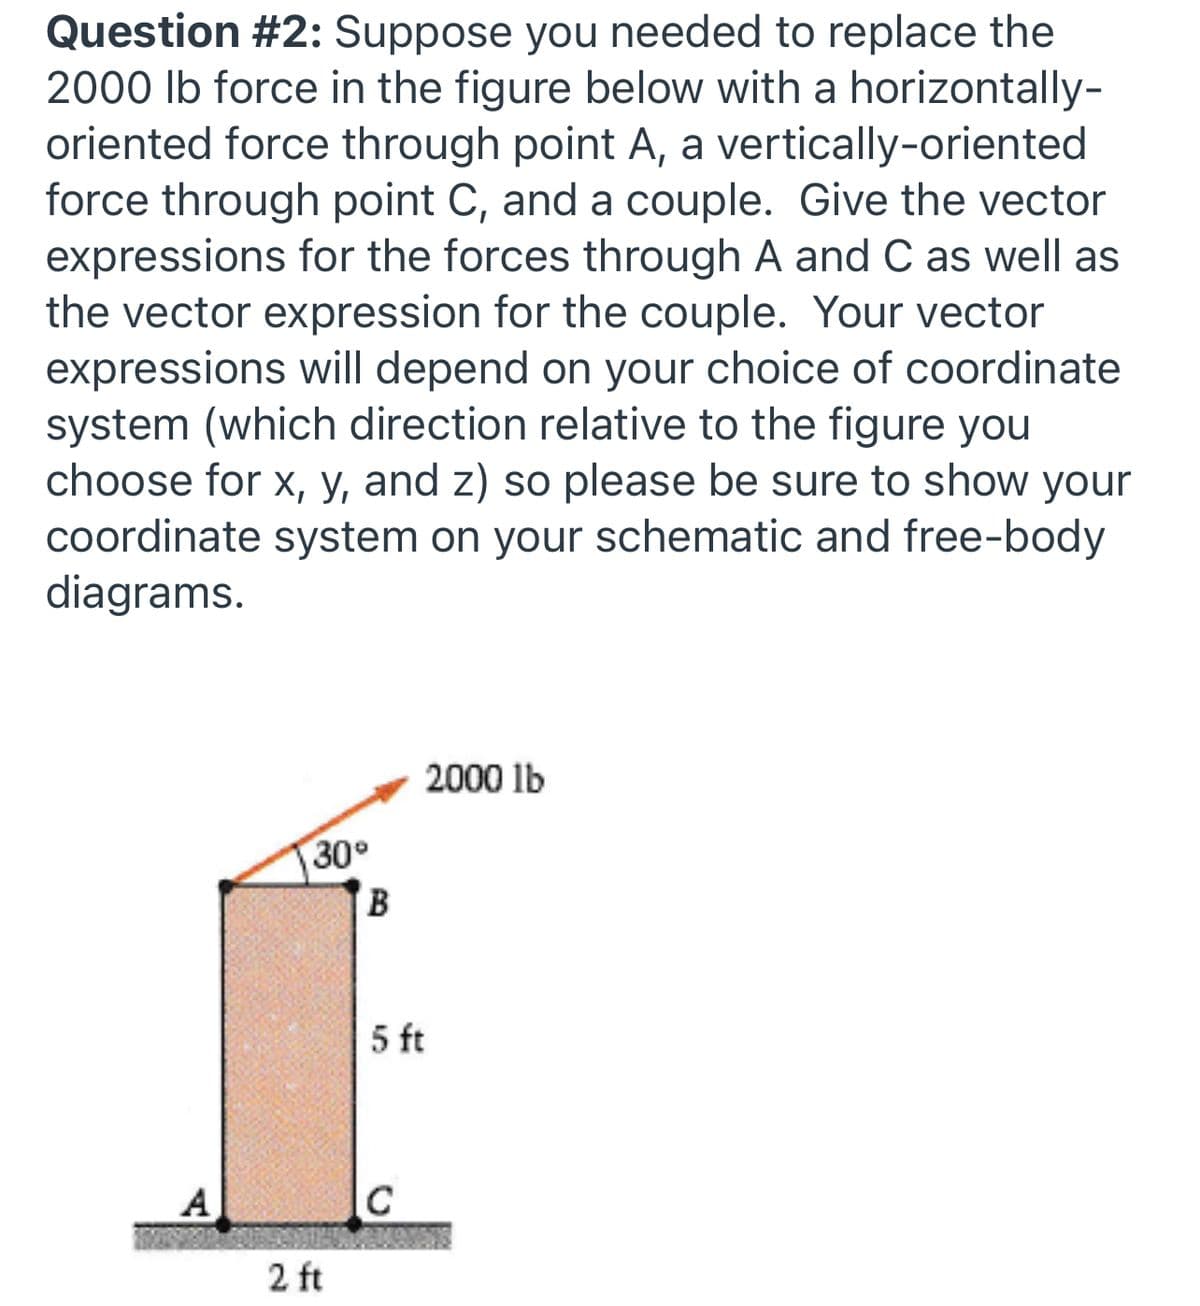 Question #2: Suppose you needed to replace the
2000 lb force in the figure below with a horizontally-
oriented force through point A, a vertically-oriented
force through point C, and a couple. Give the vector
expressions for the forces through A and C as well as
the vector expression for the couple. Your vector
expressions will depend on your choice of coordinate
system (which direction relative to the figure you
choose for x, y, and z) so please be sure to show your
coordinate system on your schematic and free-body
diagrams.
2000 lb
30
B
5 ft
A
2 ft
